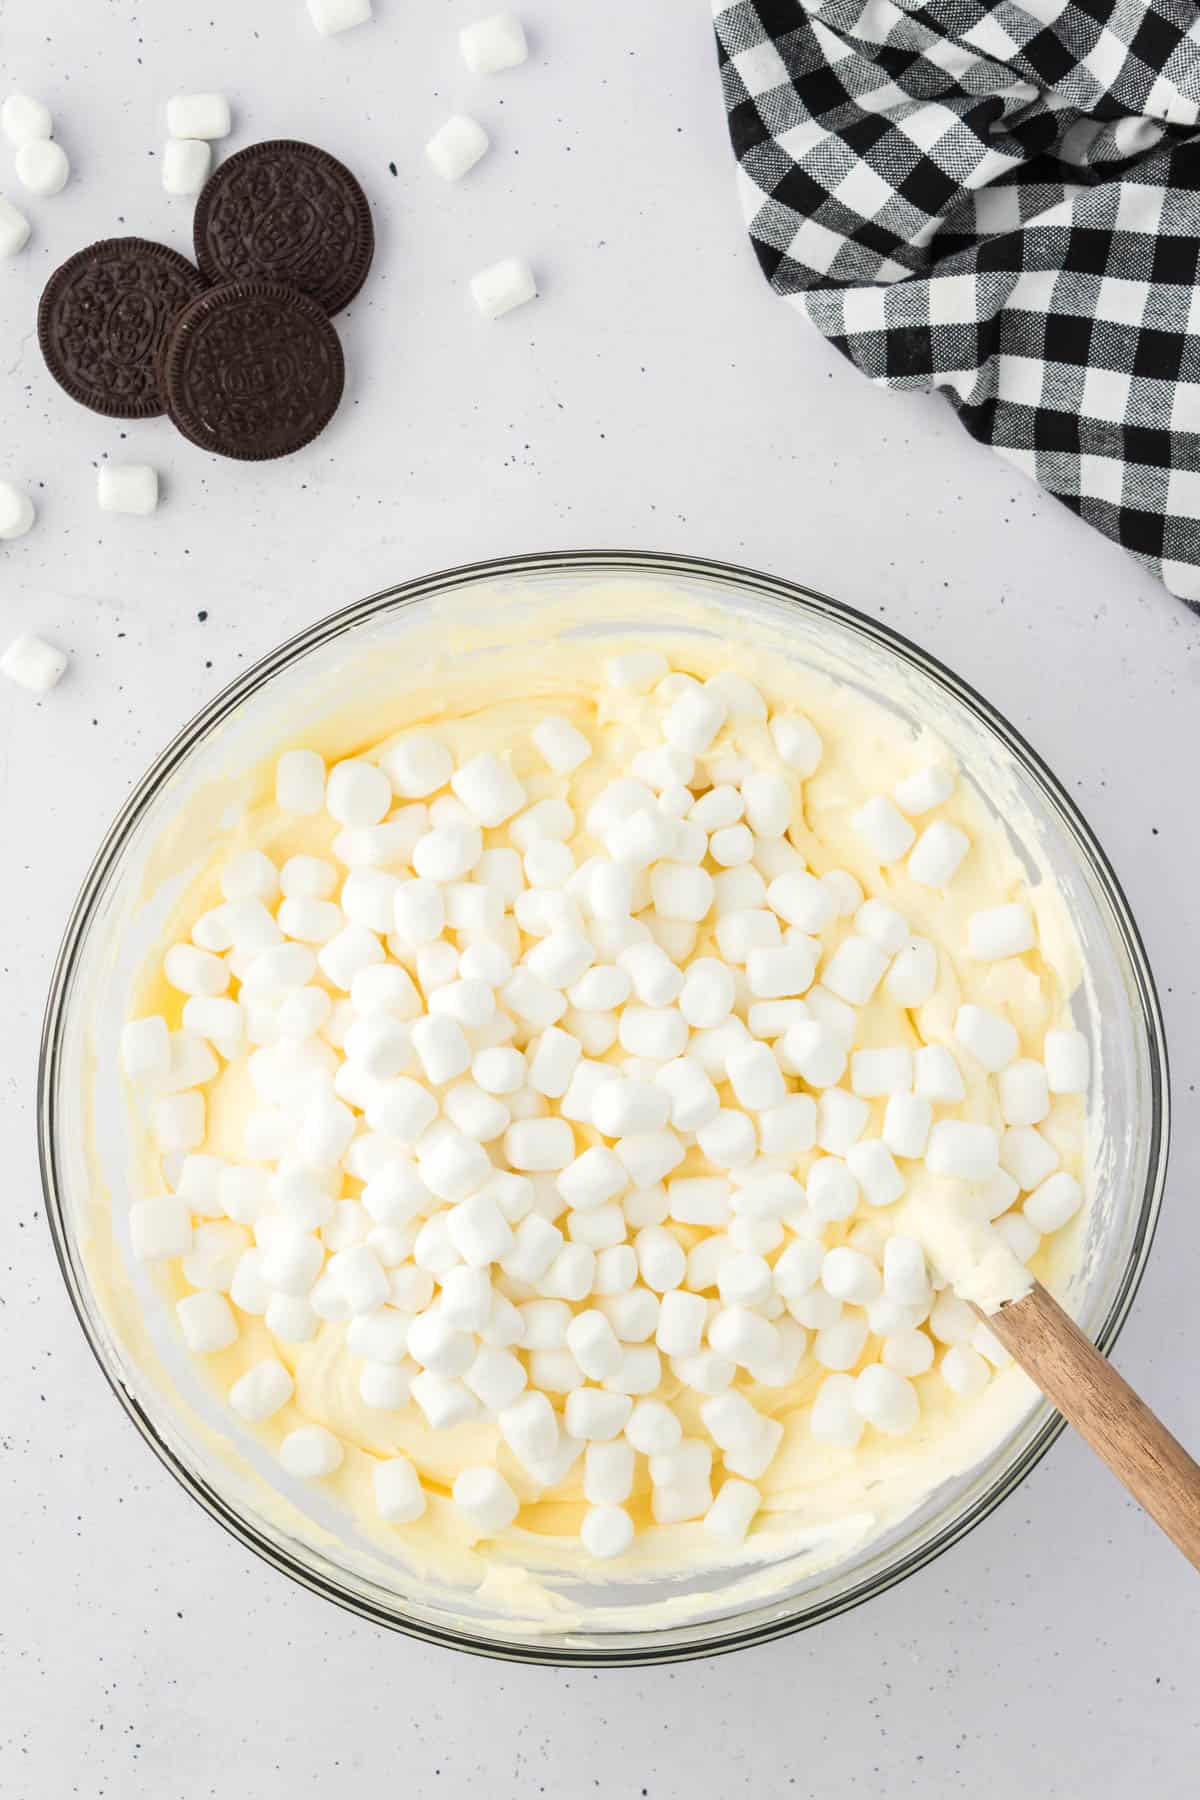 vanilla pudding mixture topped with mini marshmallows in a glass bowl, surrounded by oreos, mini marshmallows and a black and white checkered kitchen towel